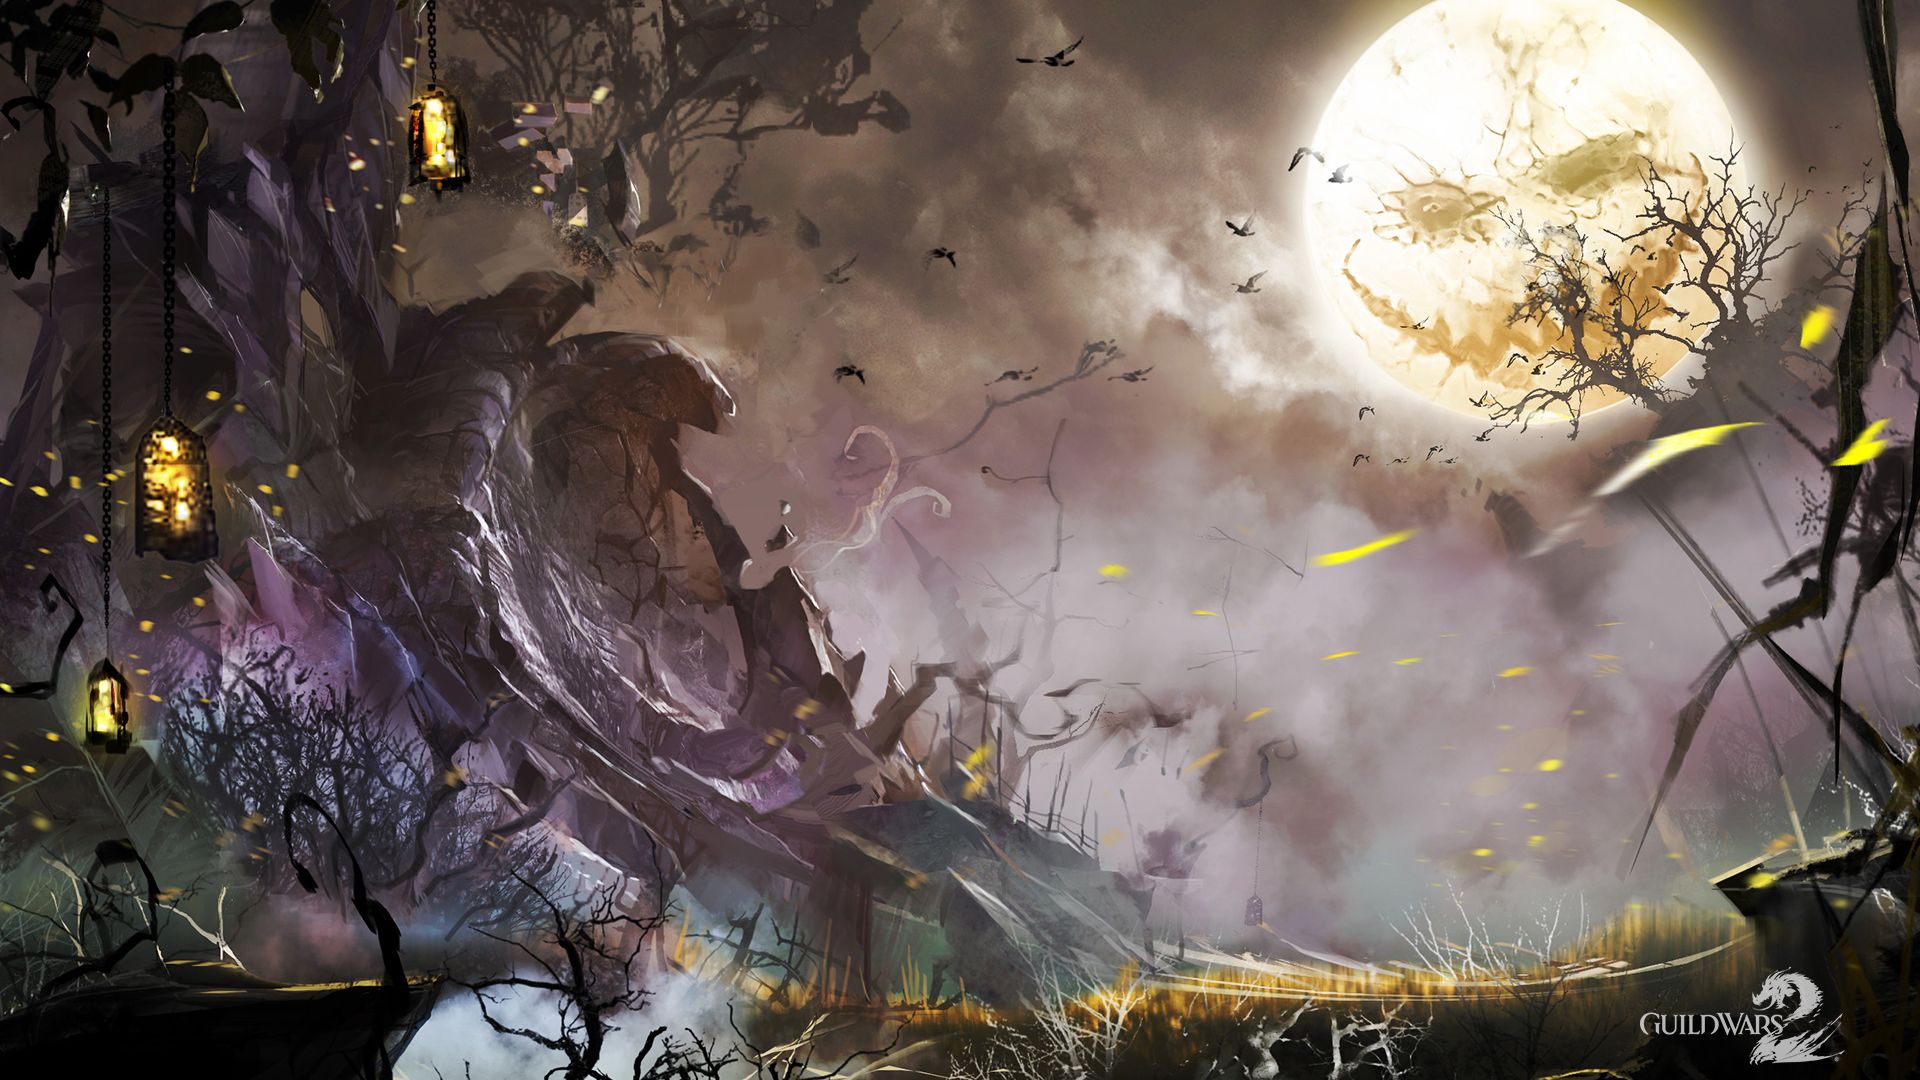 Wallpaper Guild wars 2 video game, scary night